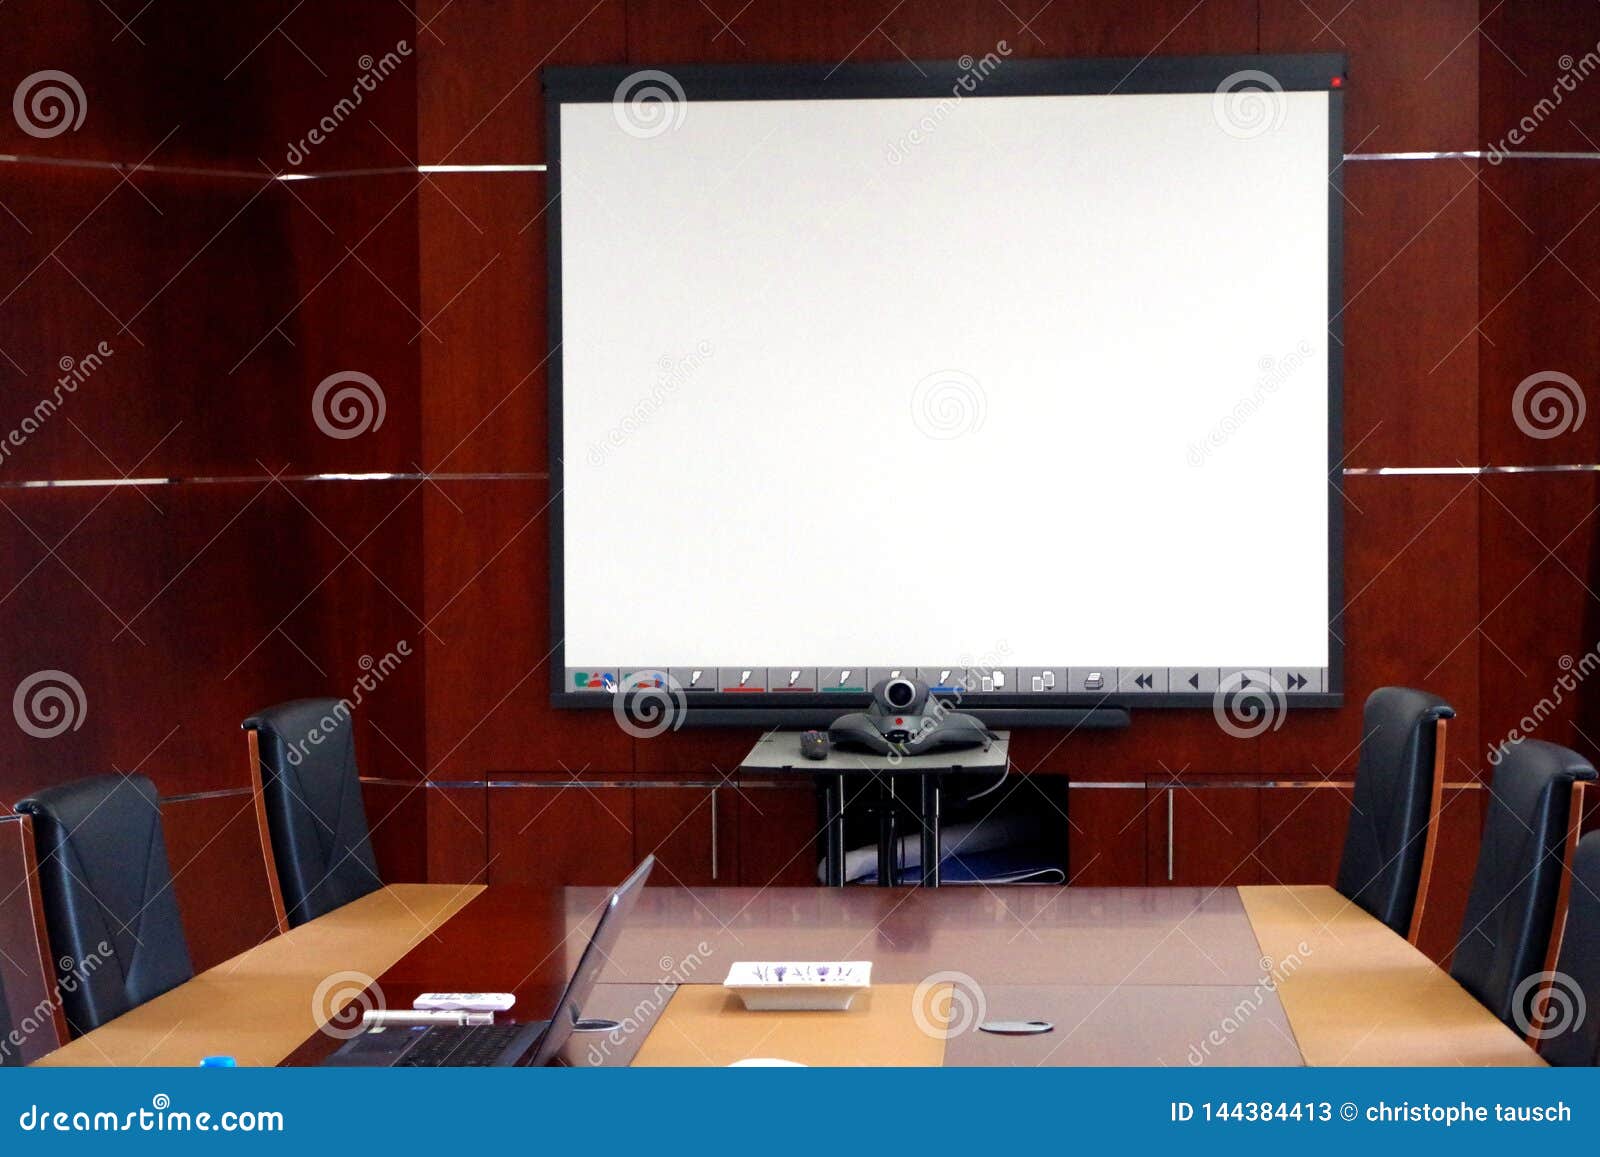 picture of a meeting room with all the modern tools needed for an efficient communication.